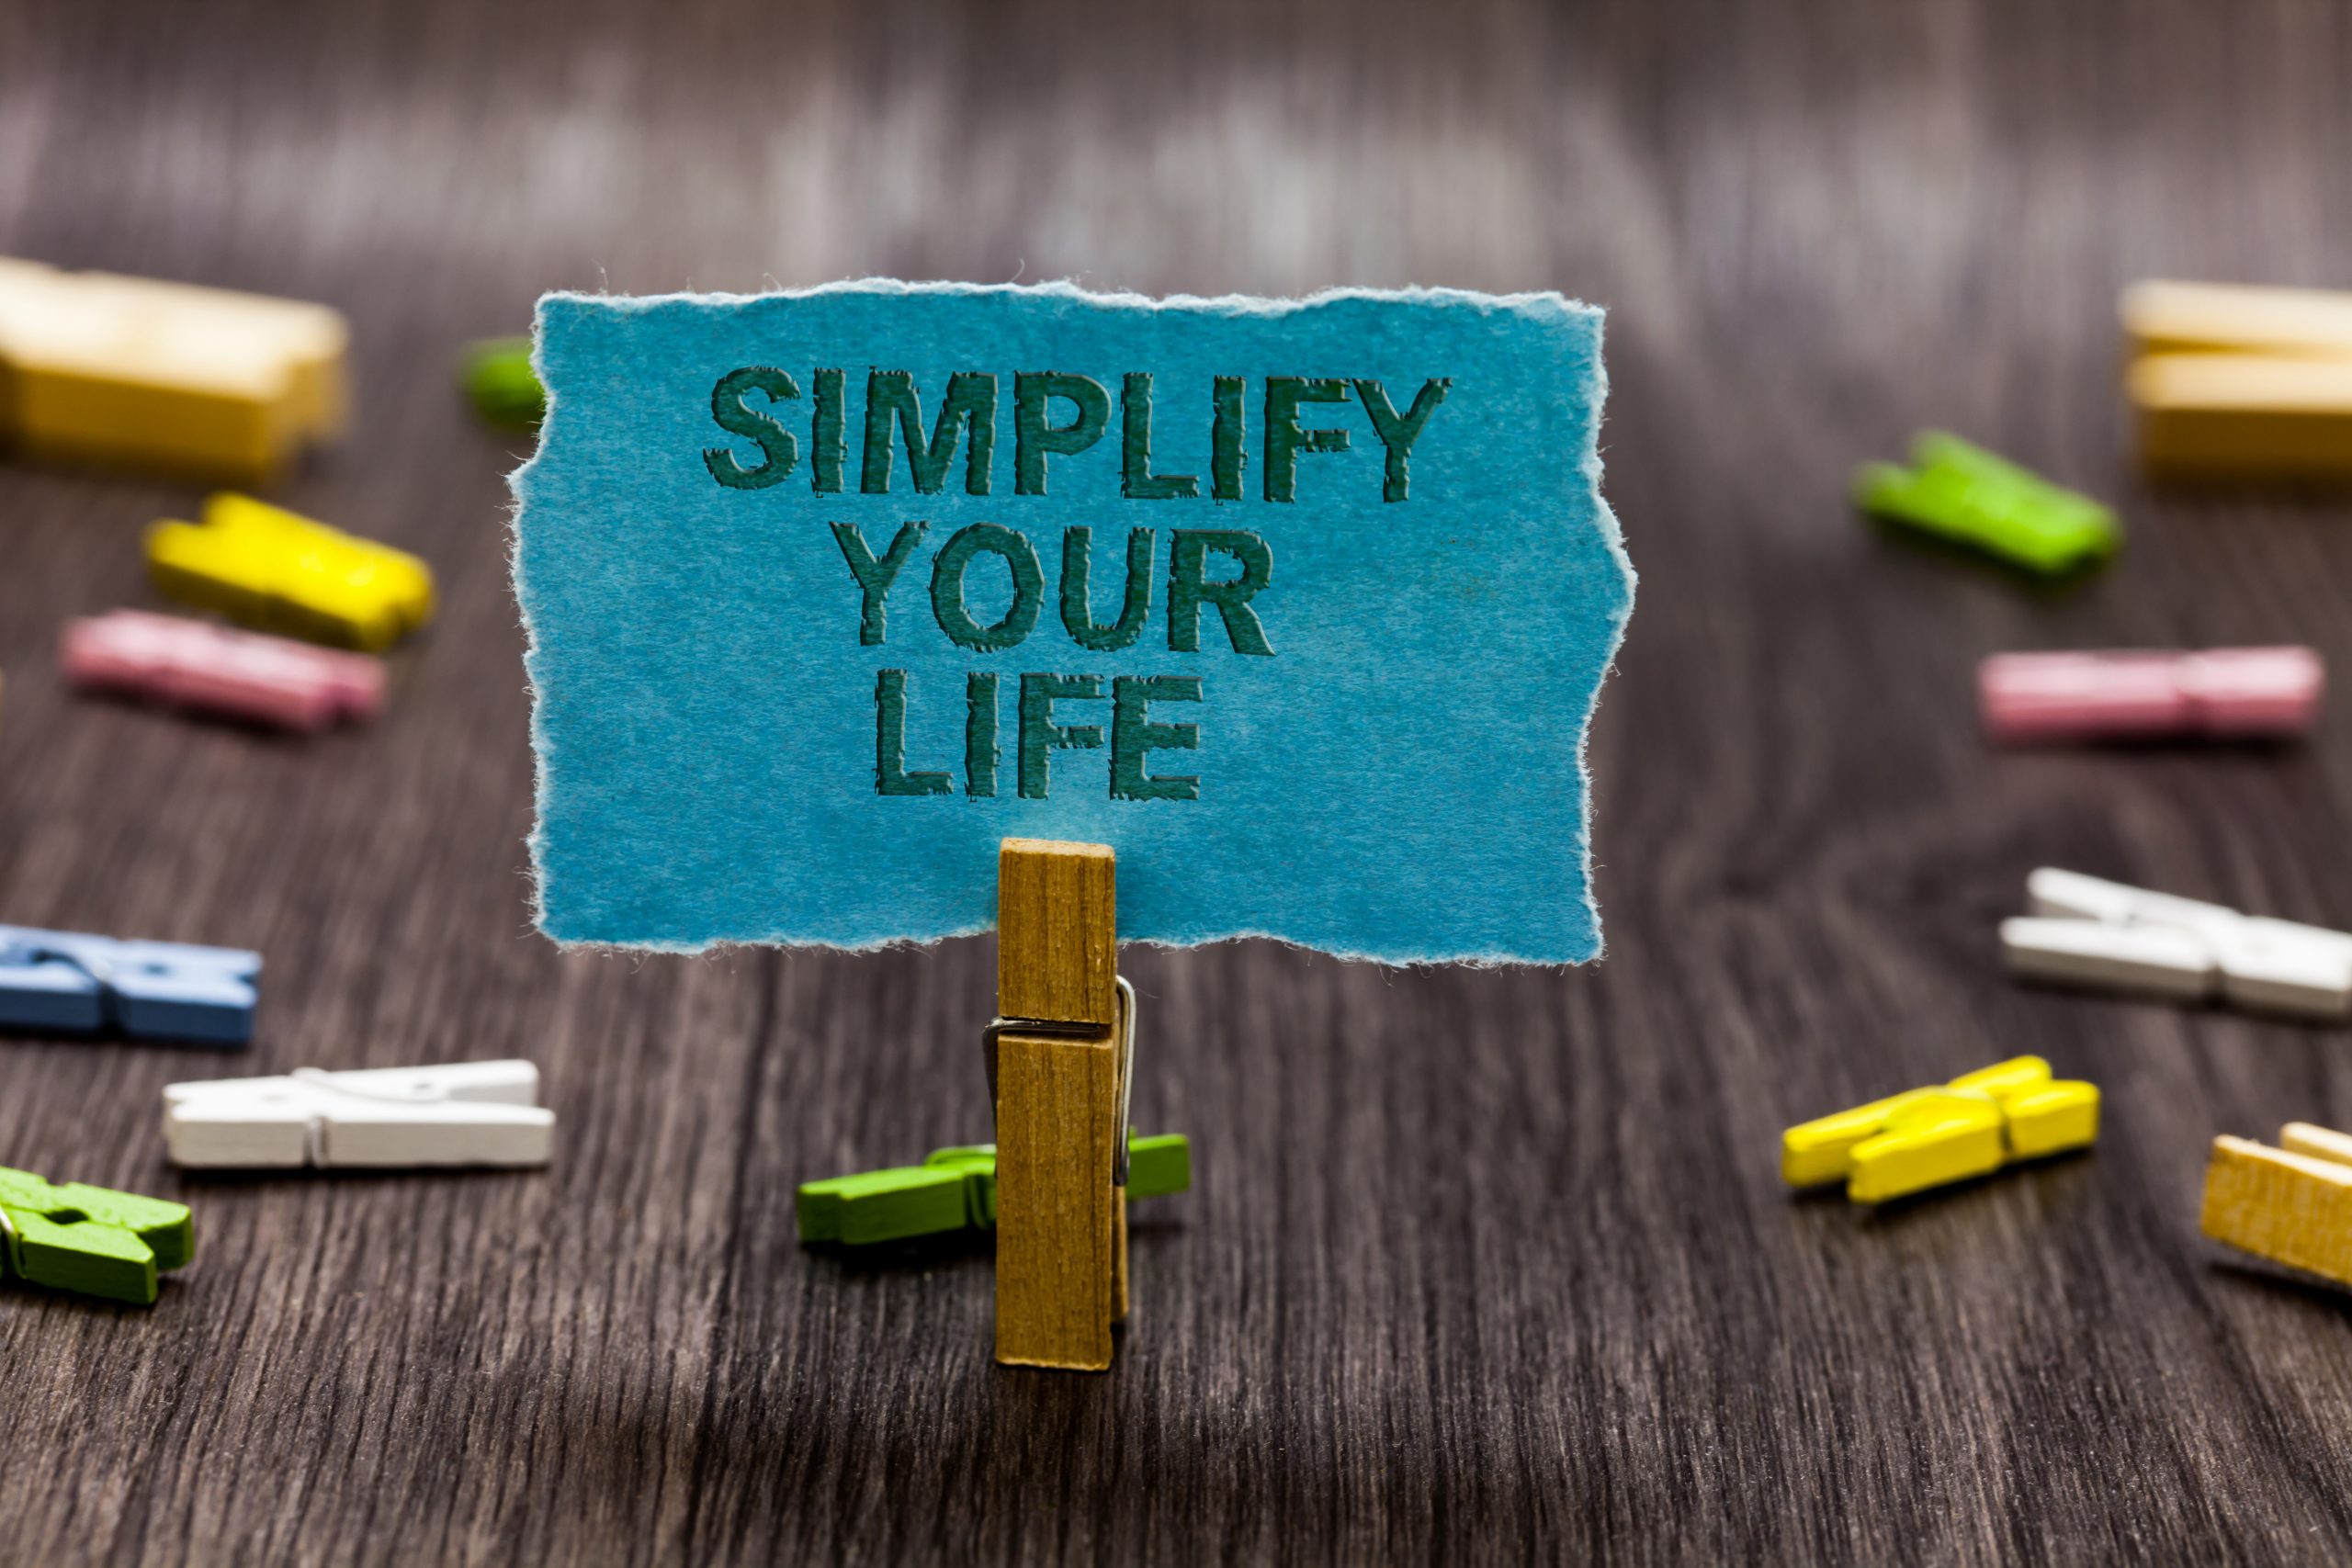 Simplify your life by downsizing